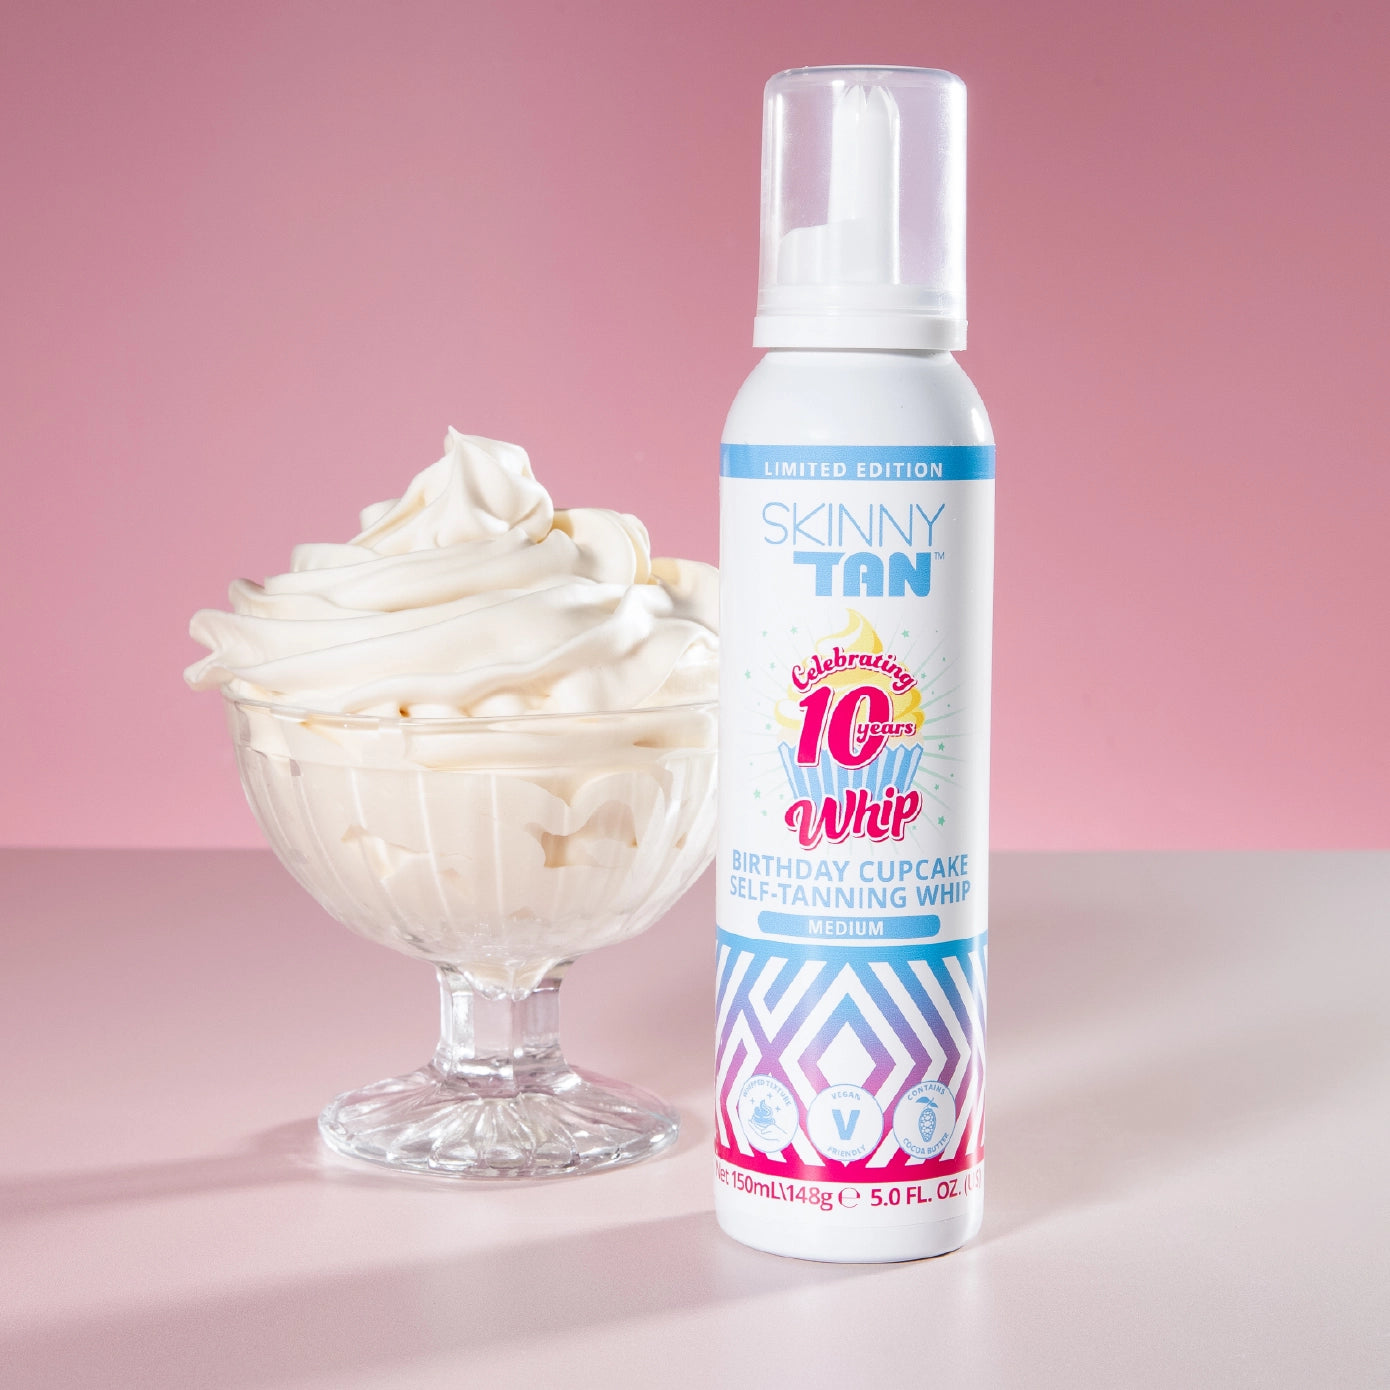 Limited Edition Birthday Cupcake Self-Tanning Whip 150ml